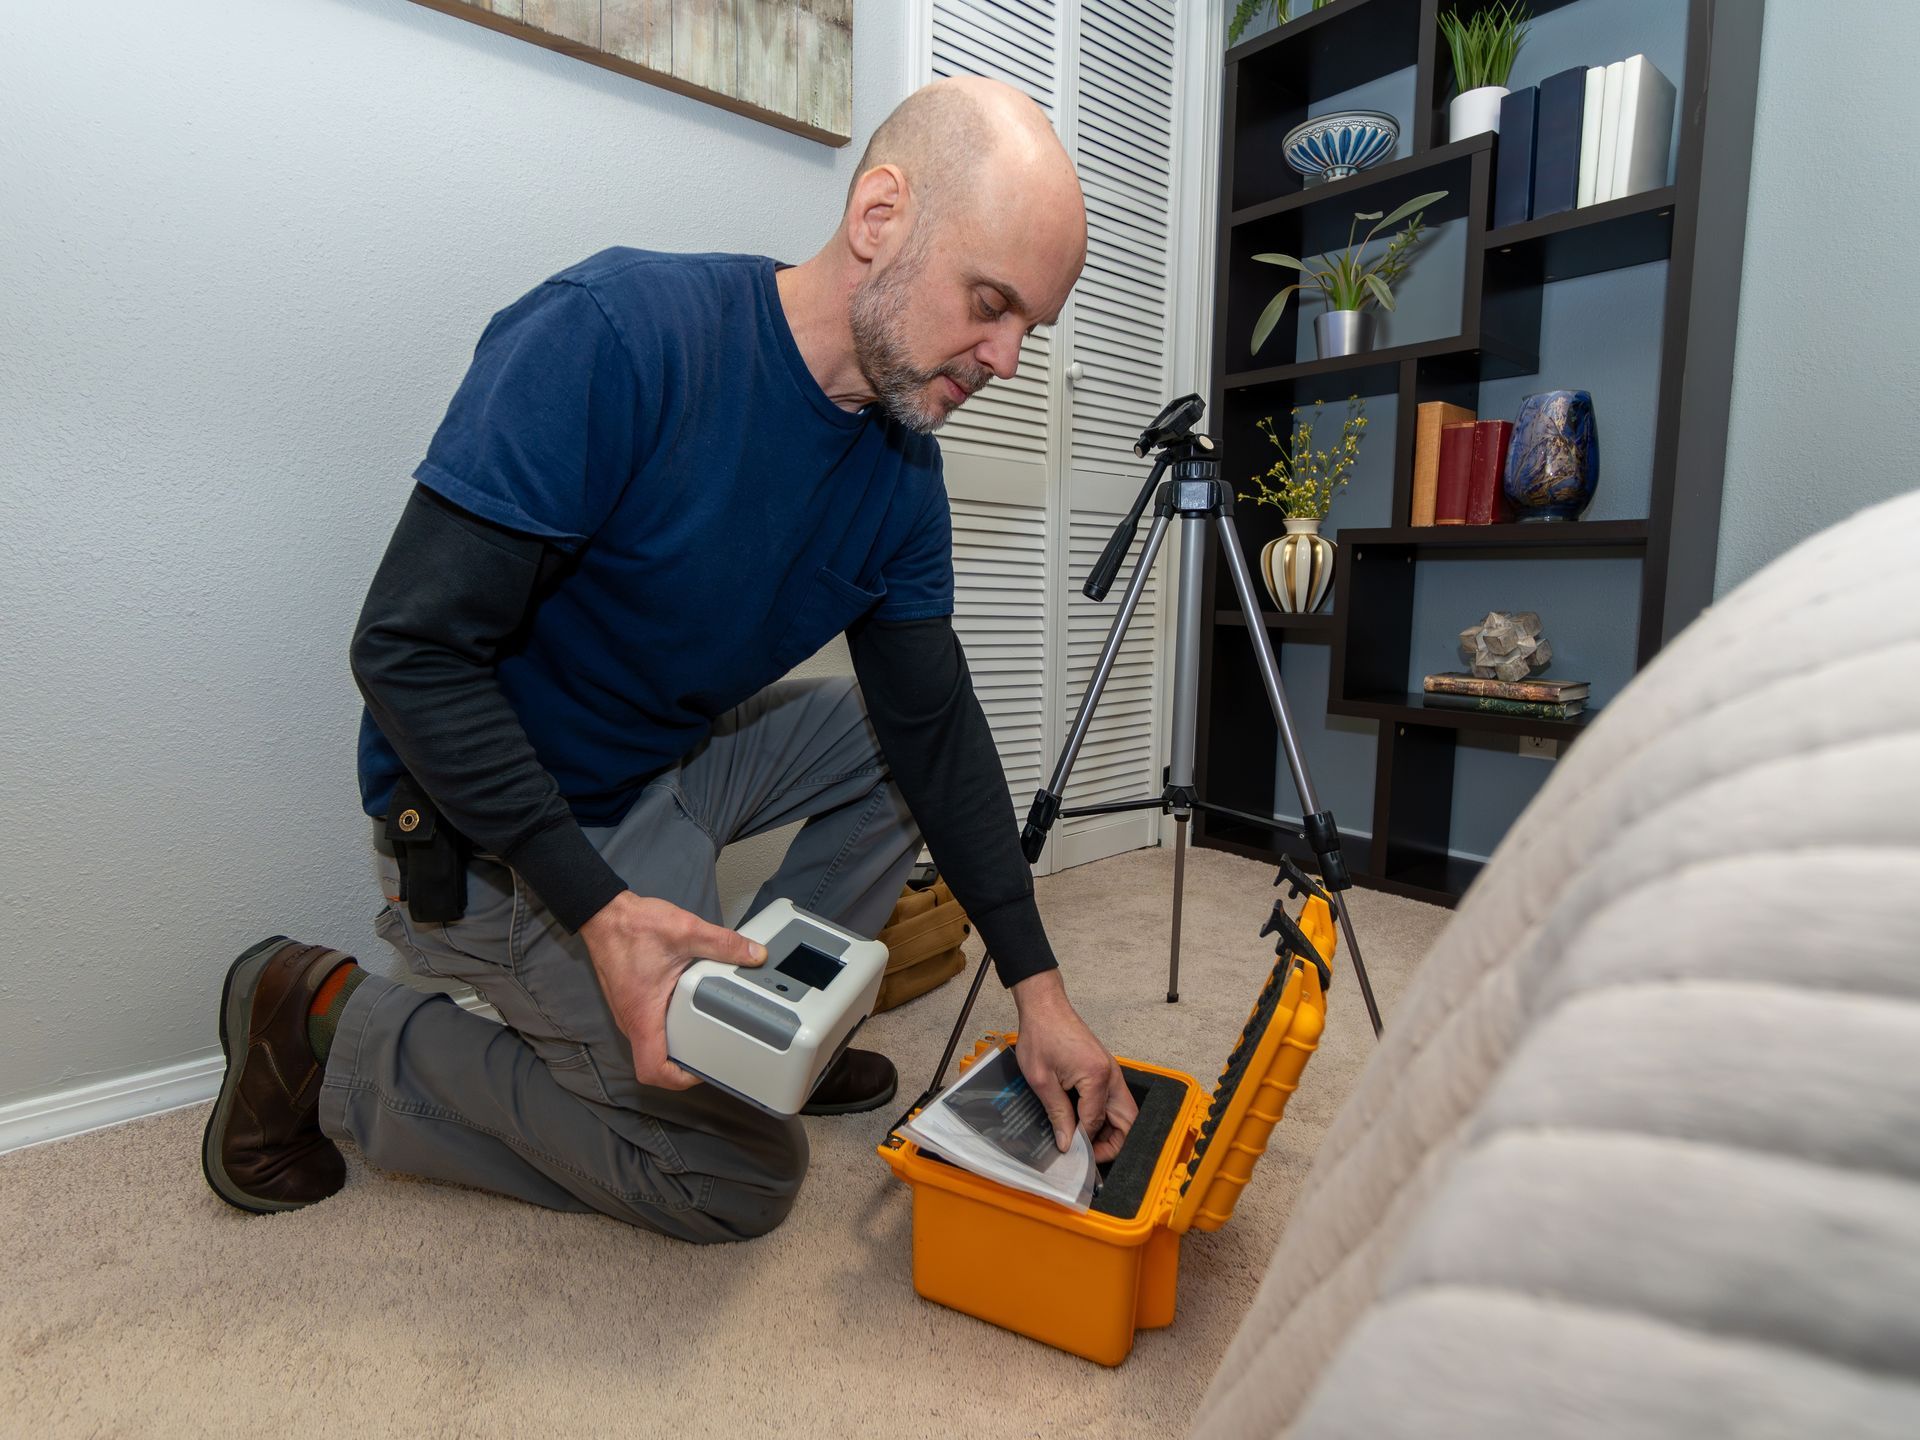 A man is kneeling on the floor in a living room holding a radon testing device.